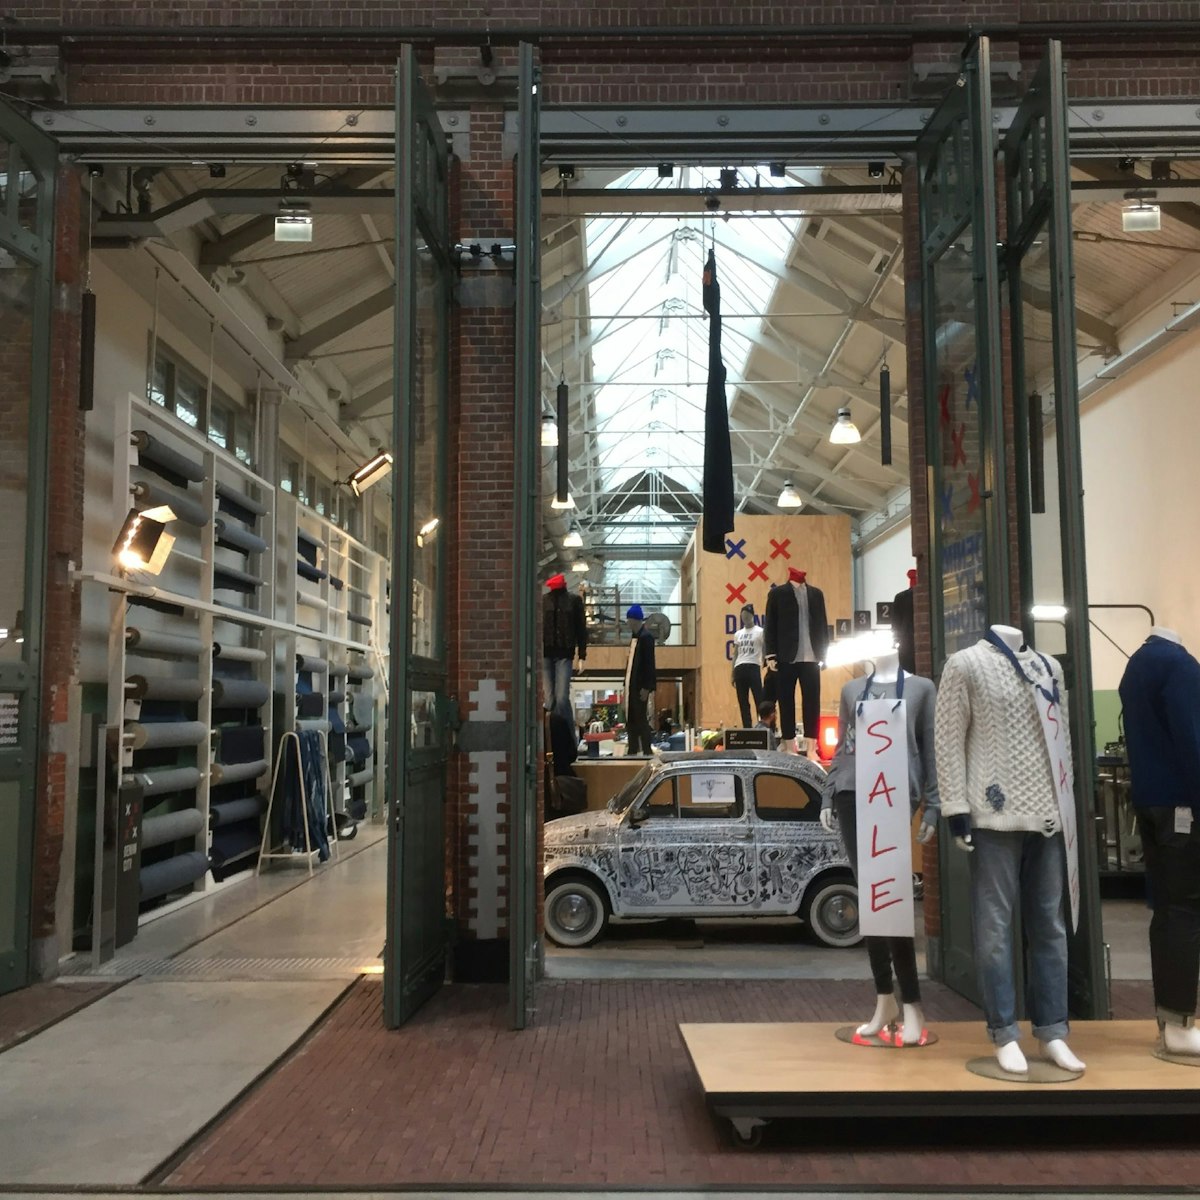 All about Jeans at Denim City store, Amsterdam